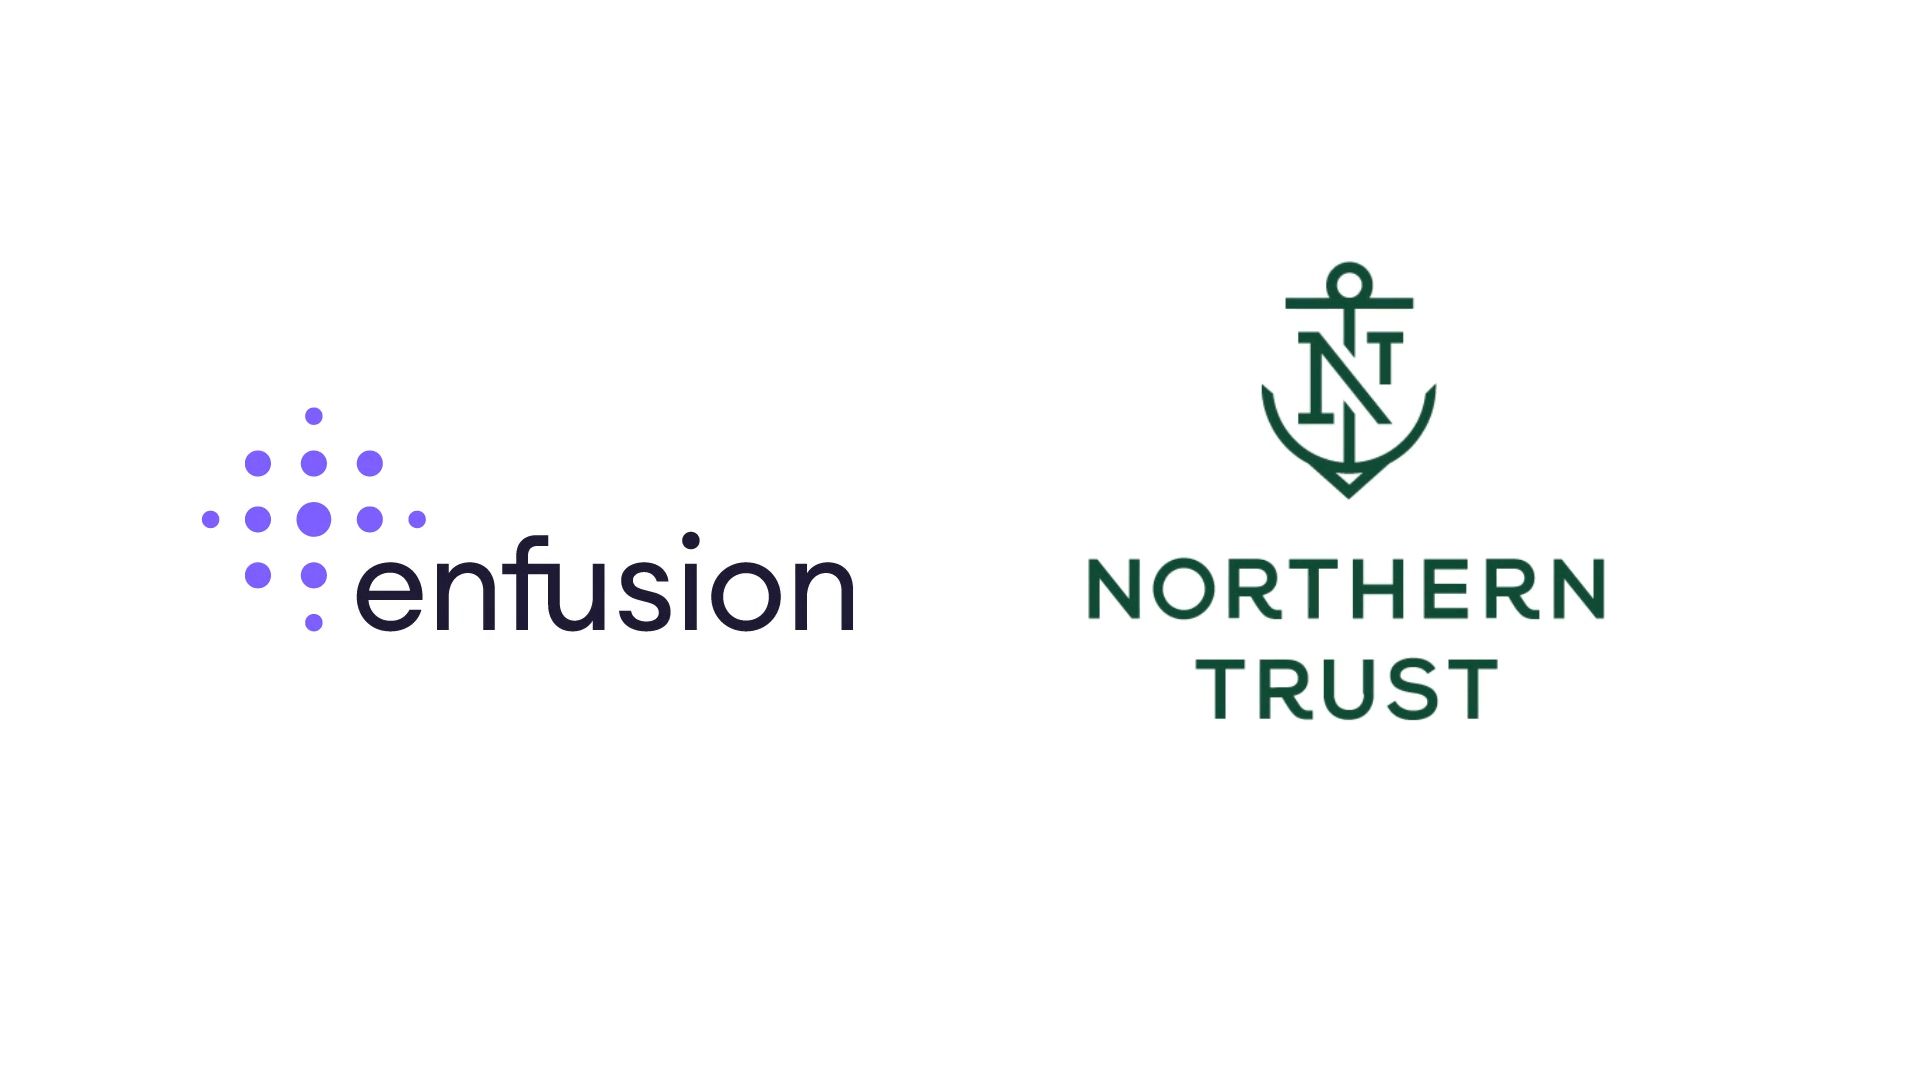 Marc Mallett, Global Head of Whole Office Strategy at Northern Trust, discusses the partnership with Enfusion to create a best-in-class ecosystem for the entire investment lifecycle that will serve mutually supported interfaces between the Enfusion platform and Northern Trust’s core asset servicing platforms.